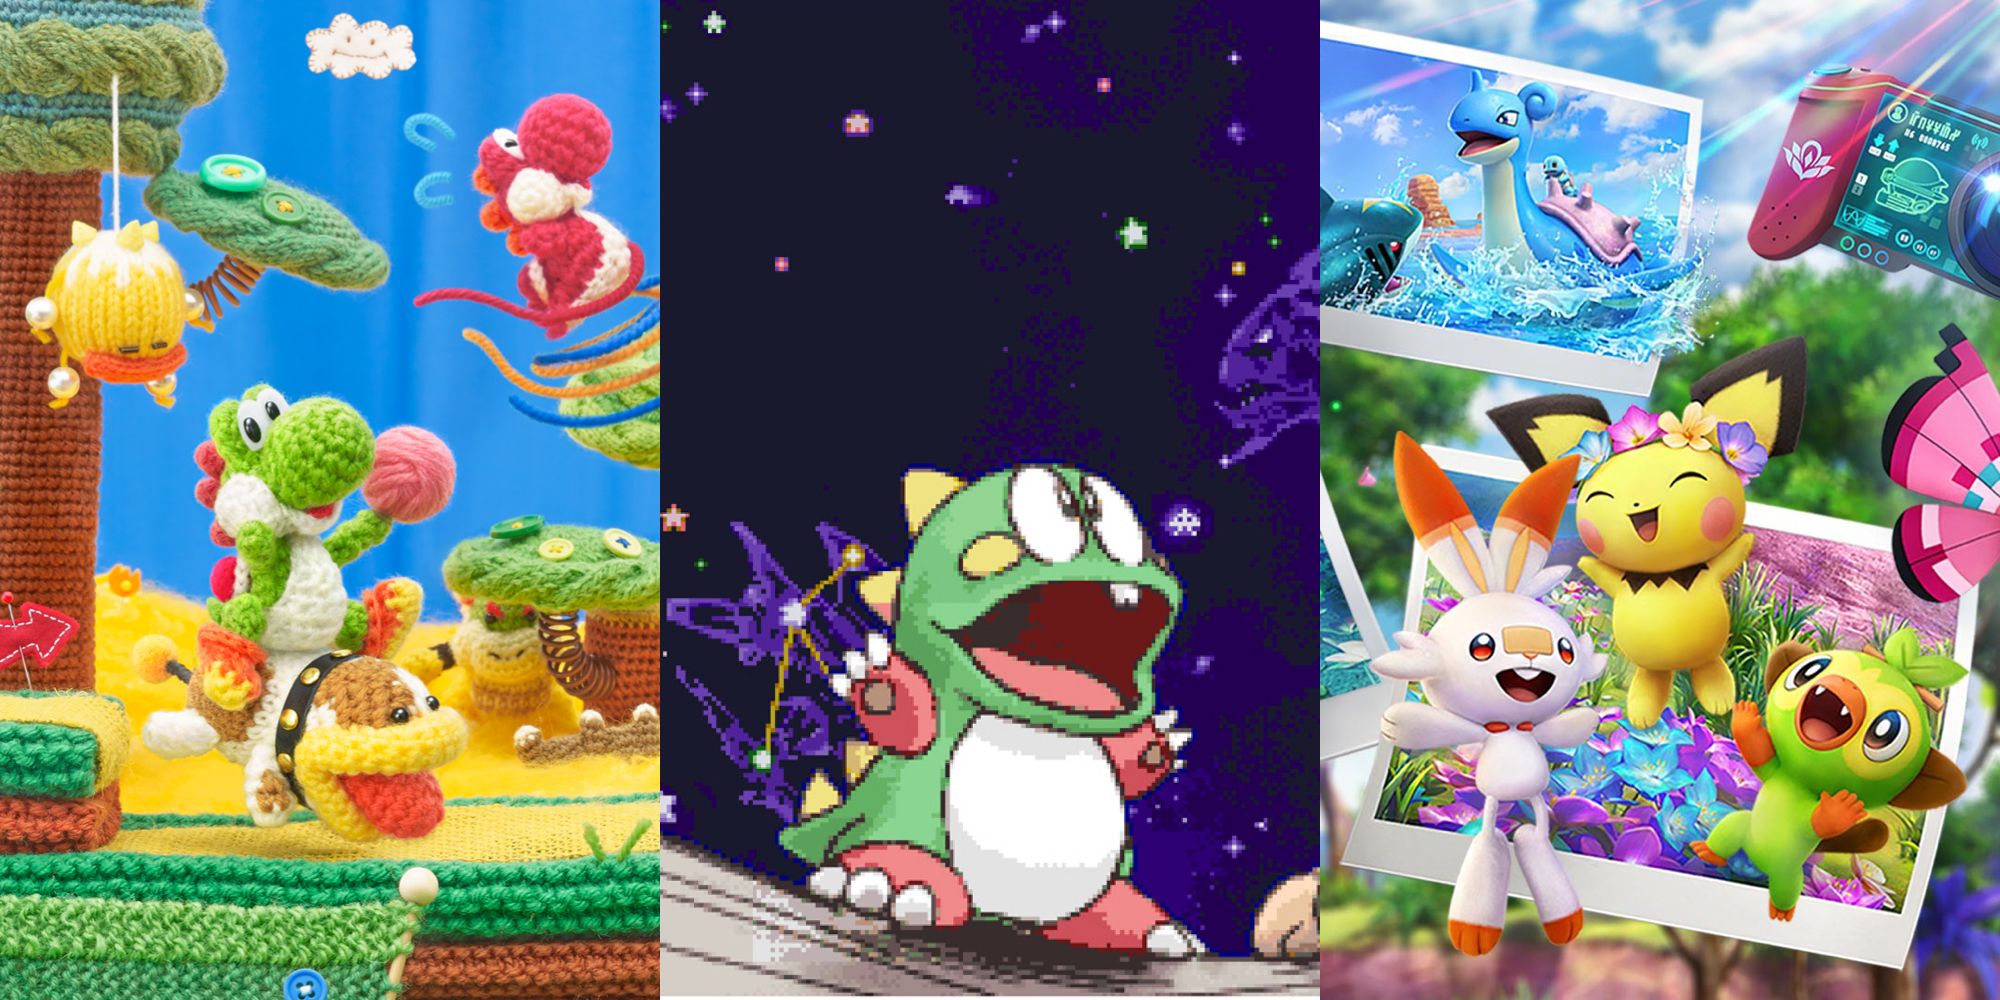 Three column, split image. From left to right, Knitted Yoshi riding on Poochy from Woolly World, Bub from Bubble Bobble looking towards the stars and the New Pokemon Snap cover image. Scorbunny, Pichu and Grookey are jumping in the air.